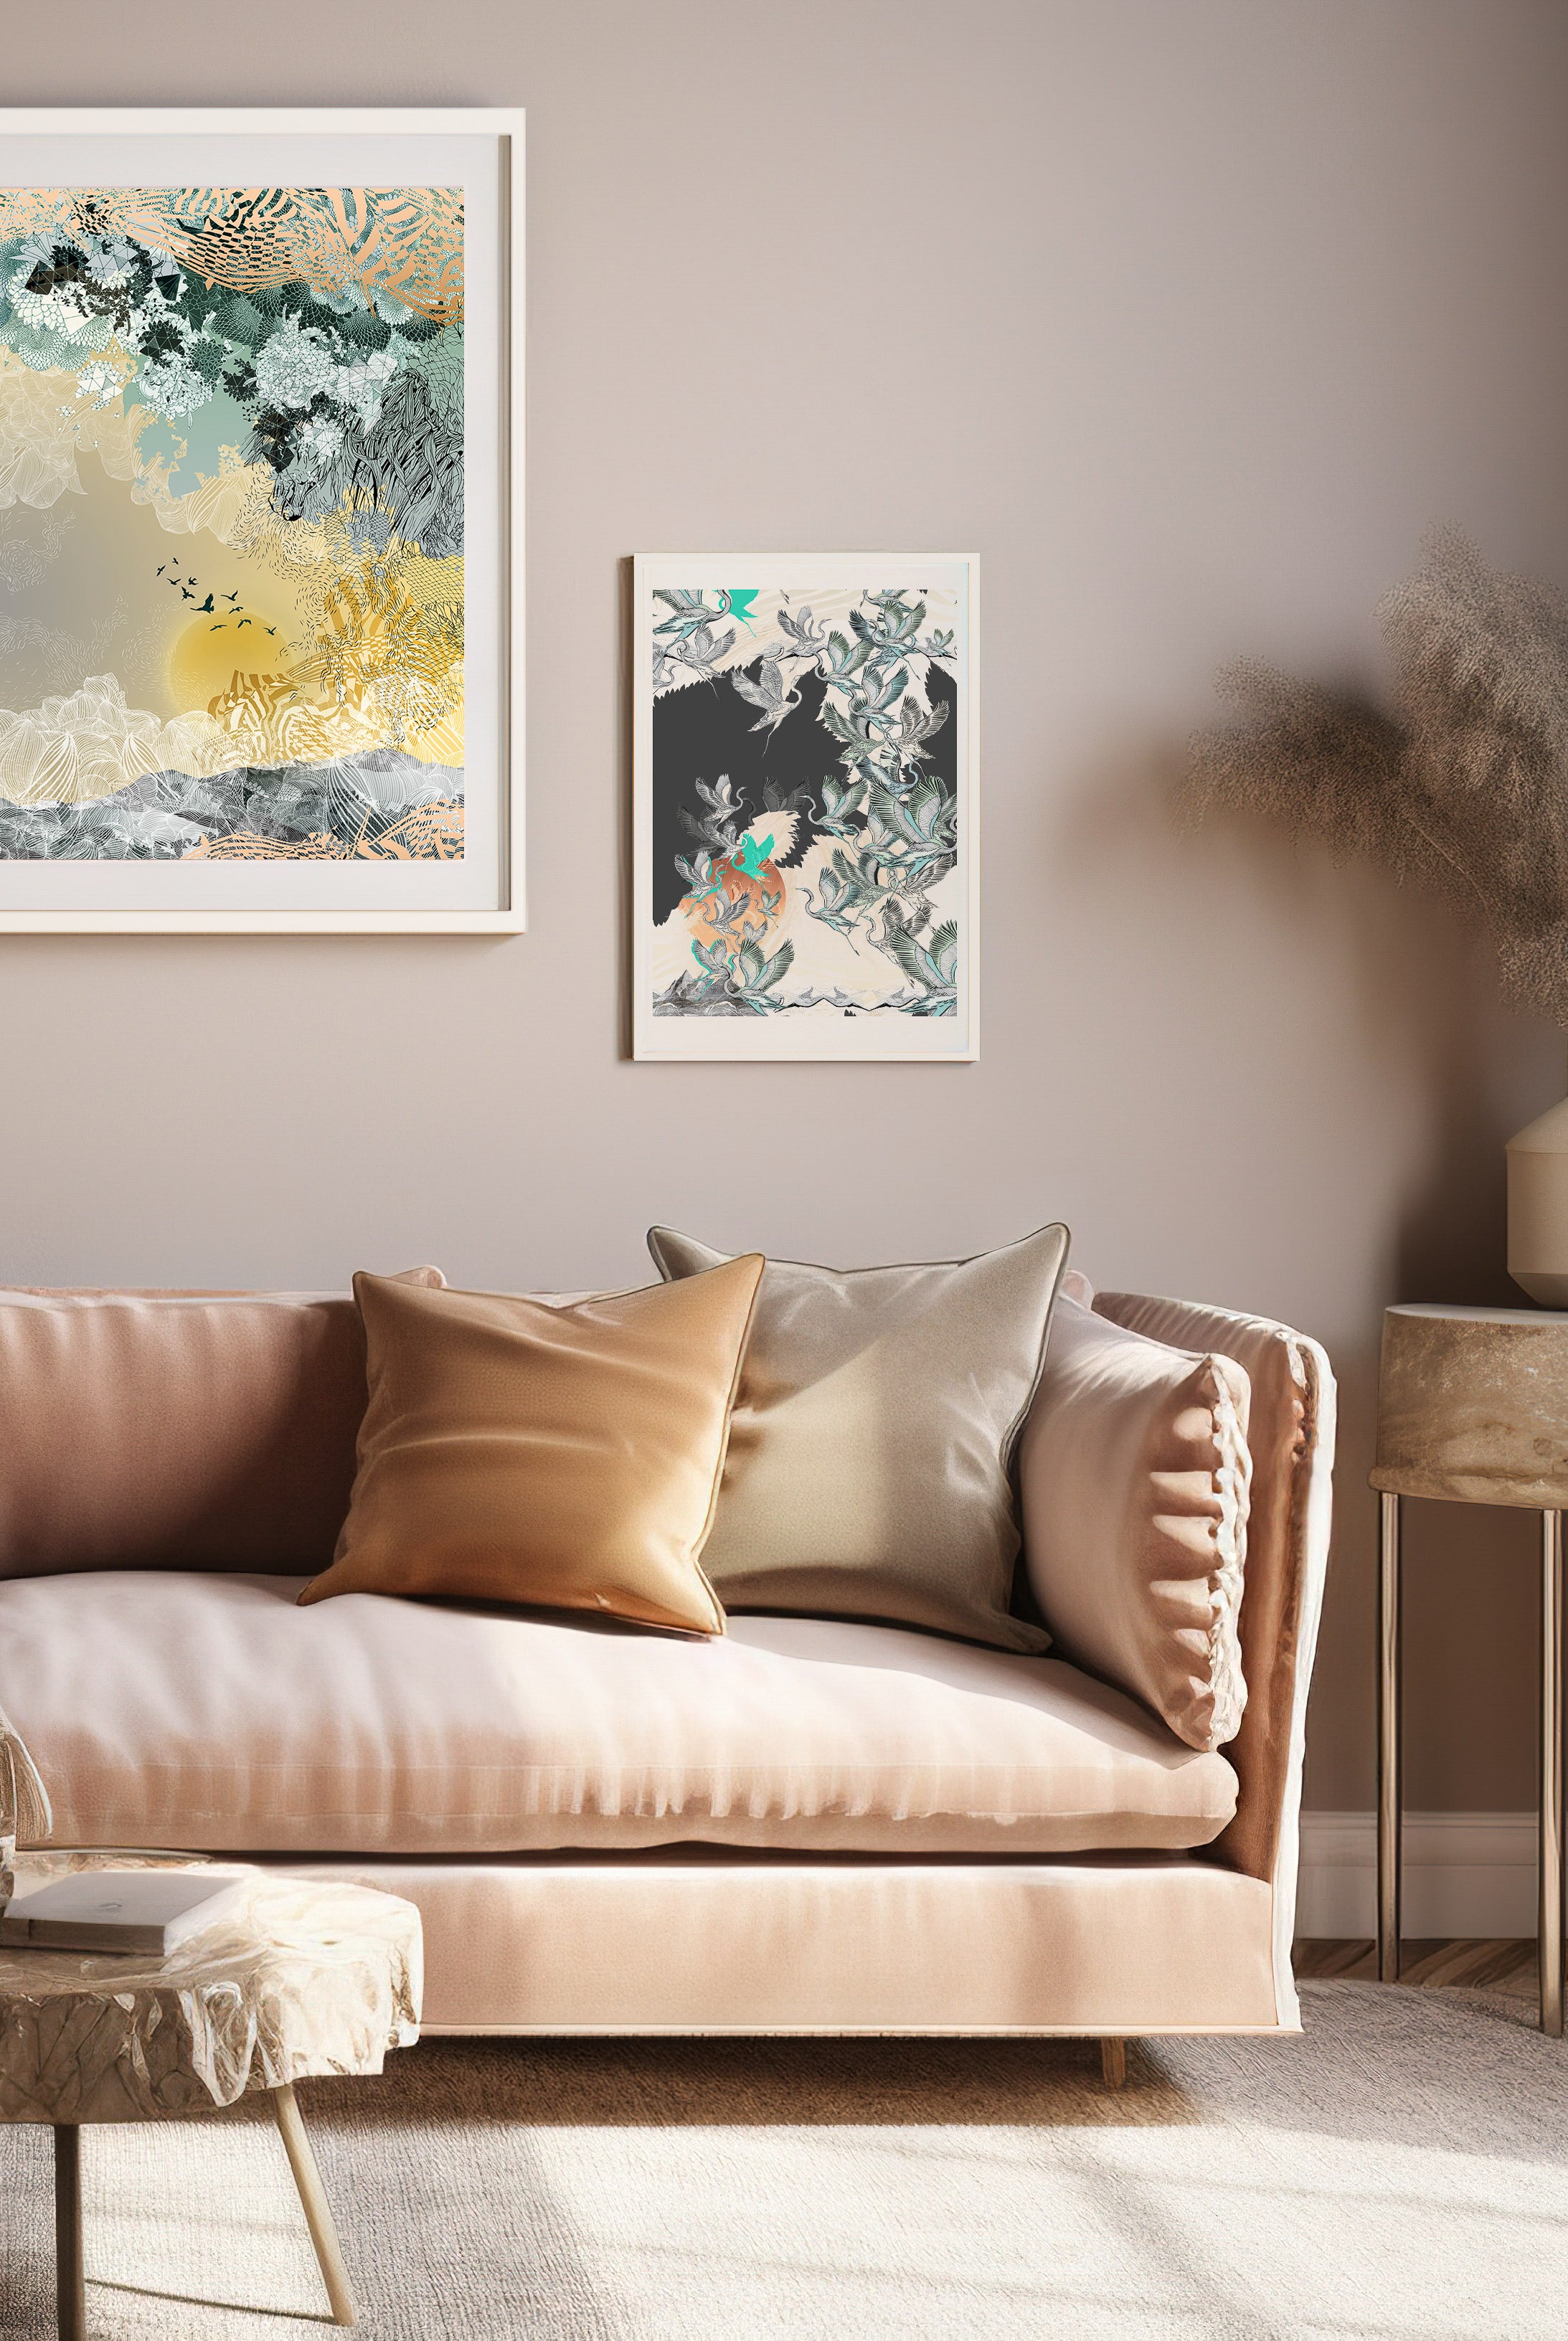 A mock up of a Giclee print in a white frame on a wall in front of a sofa